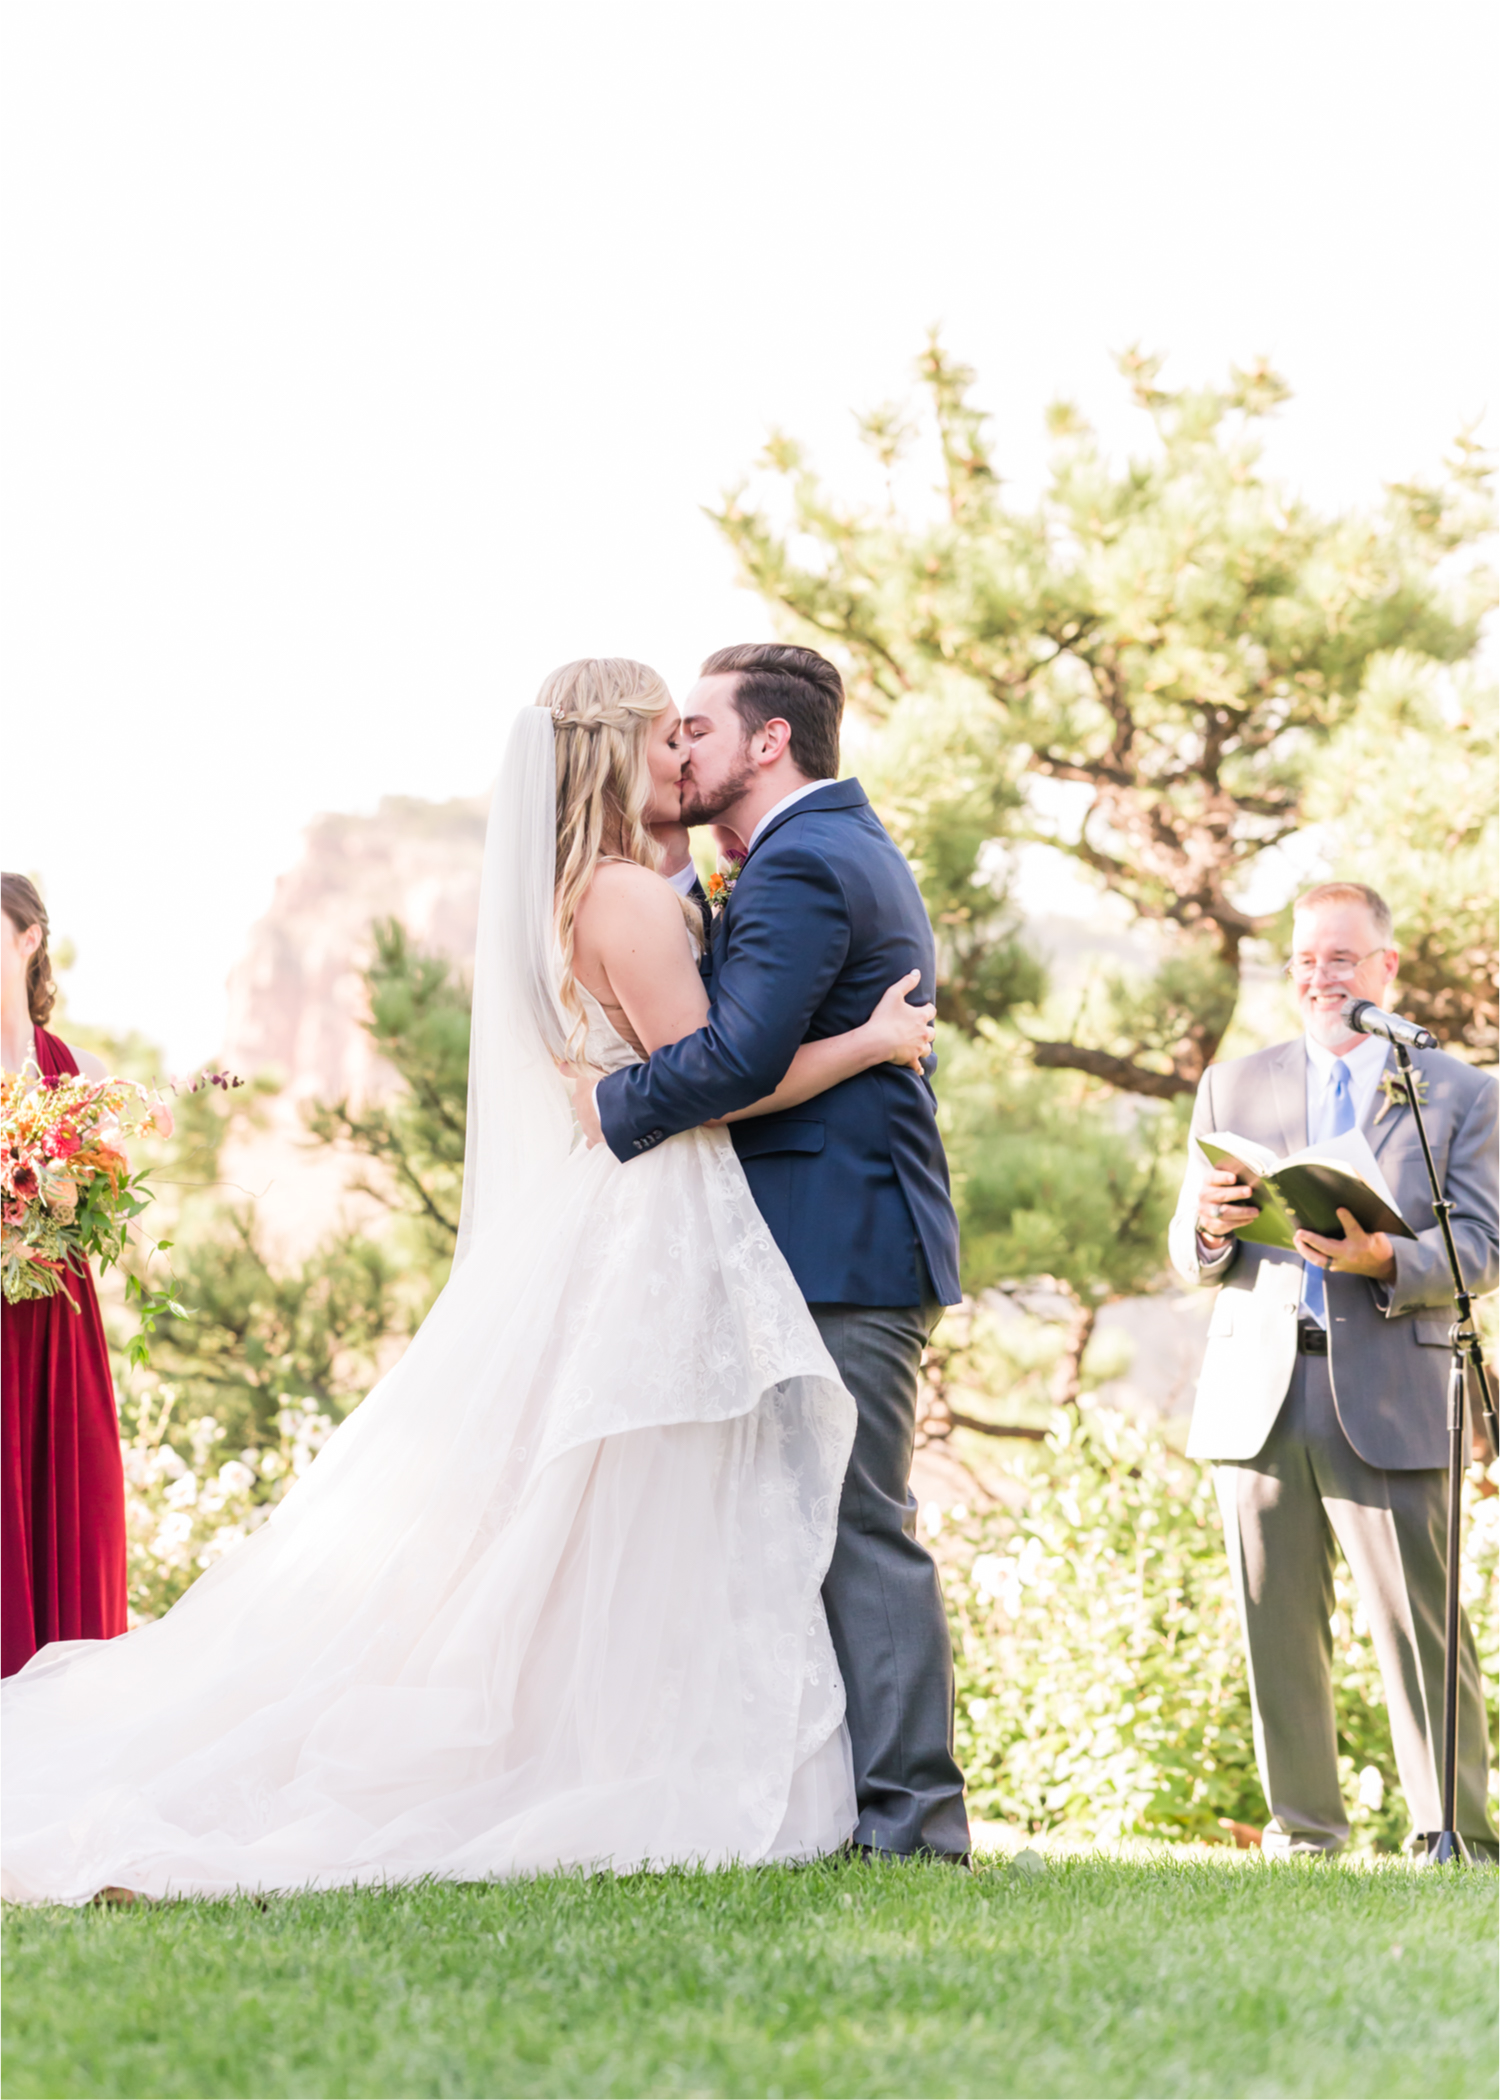 Romantic Whimsical Wedding at the Lionscrest Manor in Lyons, CO | Britni Girard Photography - Wedding Photo and Video Team | Rustic Fall Decor mixed in Burgundy, Blush, Gold and Sage | Wedding Dress from Anna Be Bridal by Hailey Paige | Hair and Makeup by Glam 5280 Chaundra Revier | Florals by Aflorae | Ceremony Site overlooking the Rocky Mountains | Mountaintop Ceremony before Sunset First Kiss